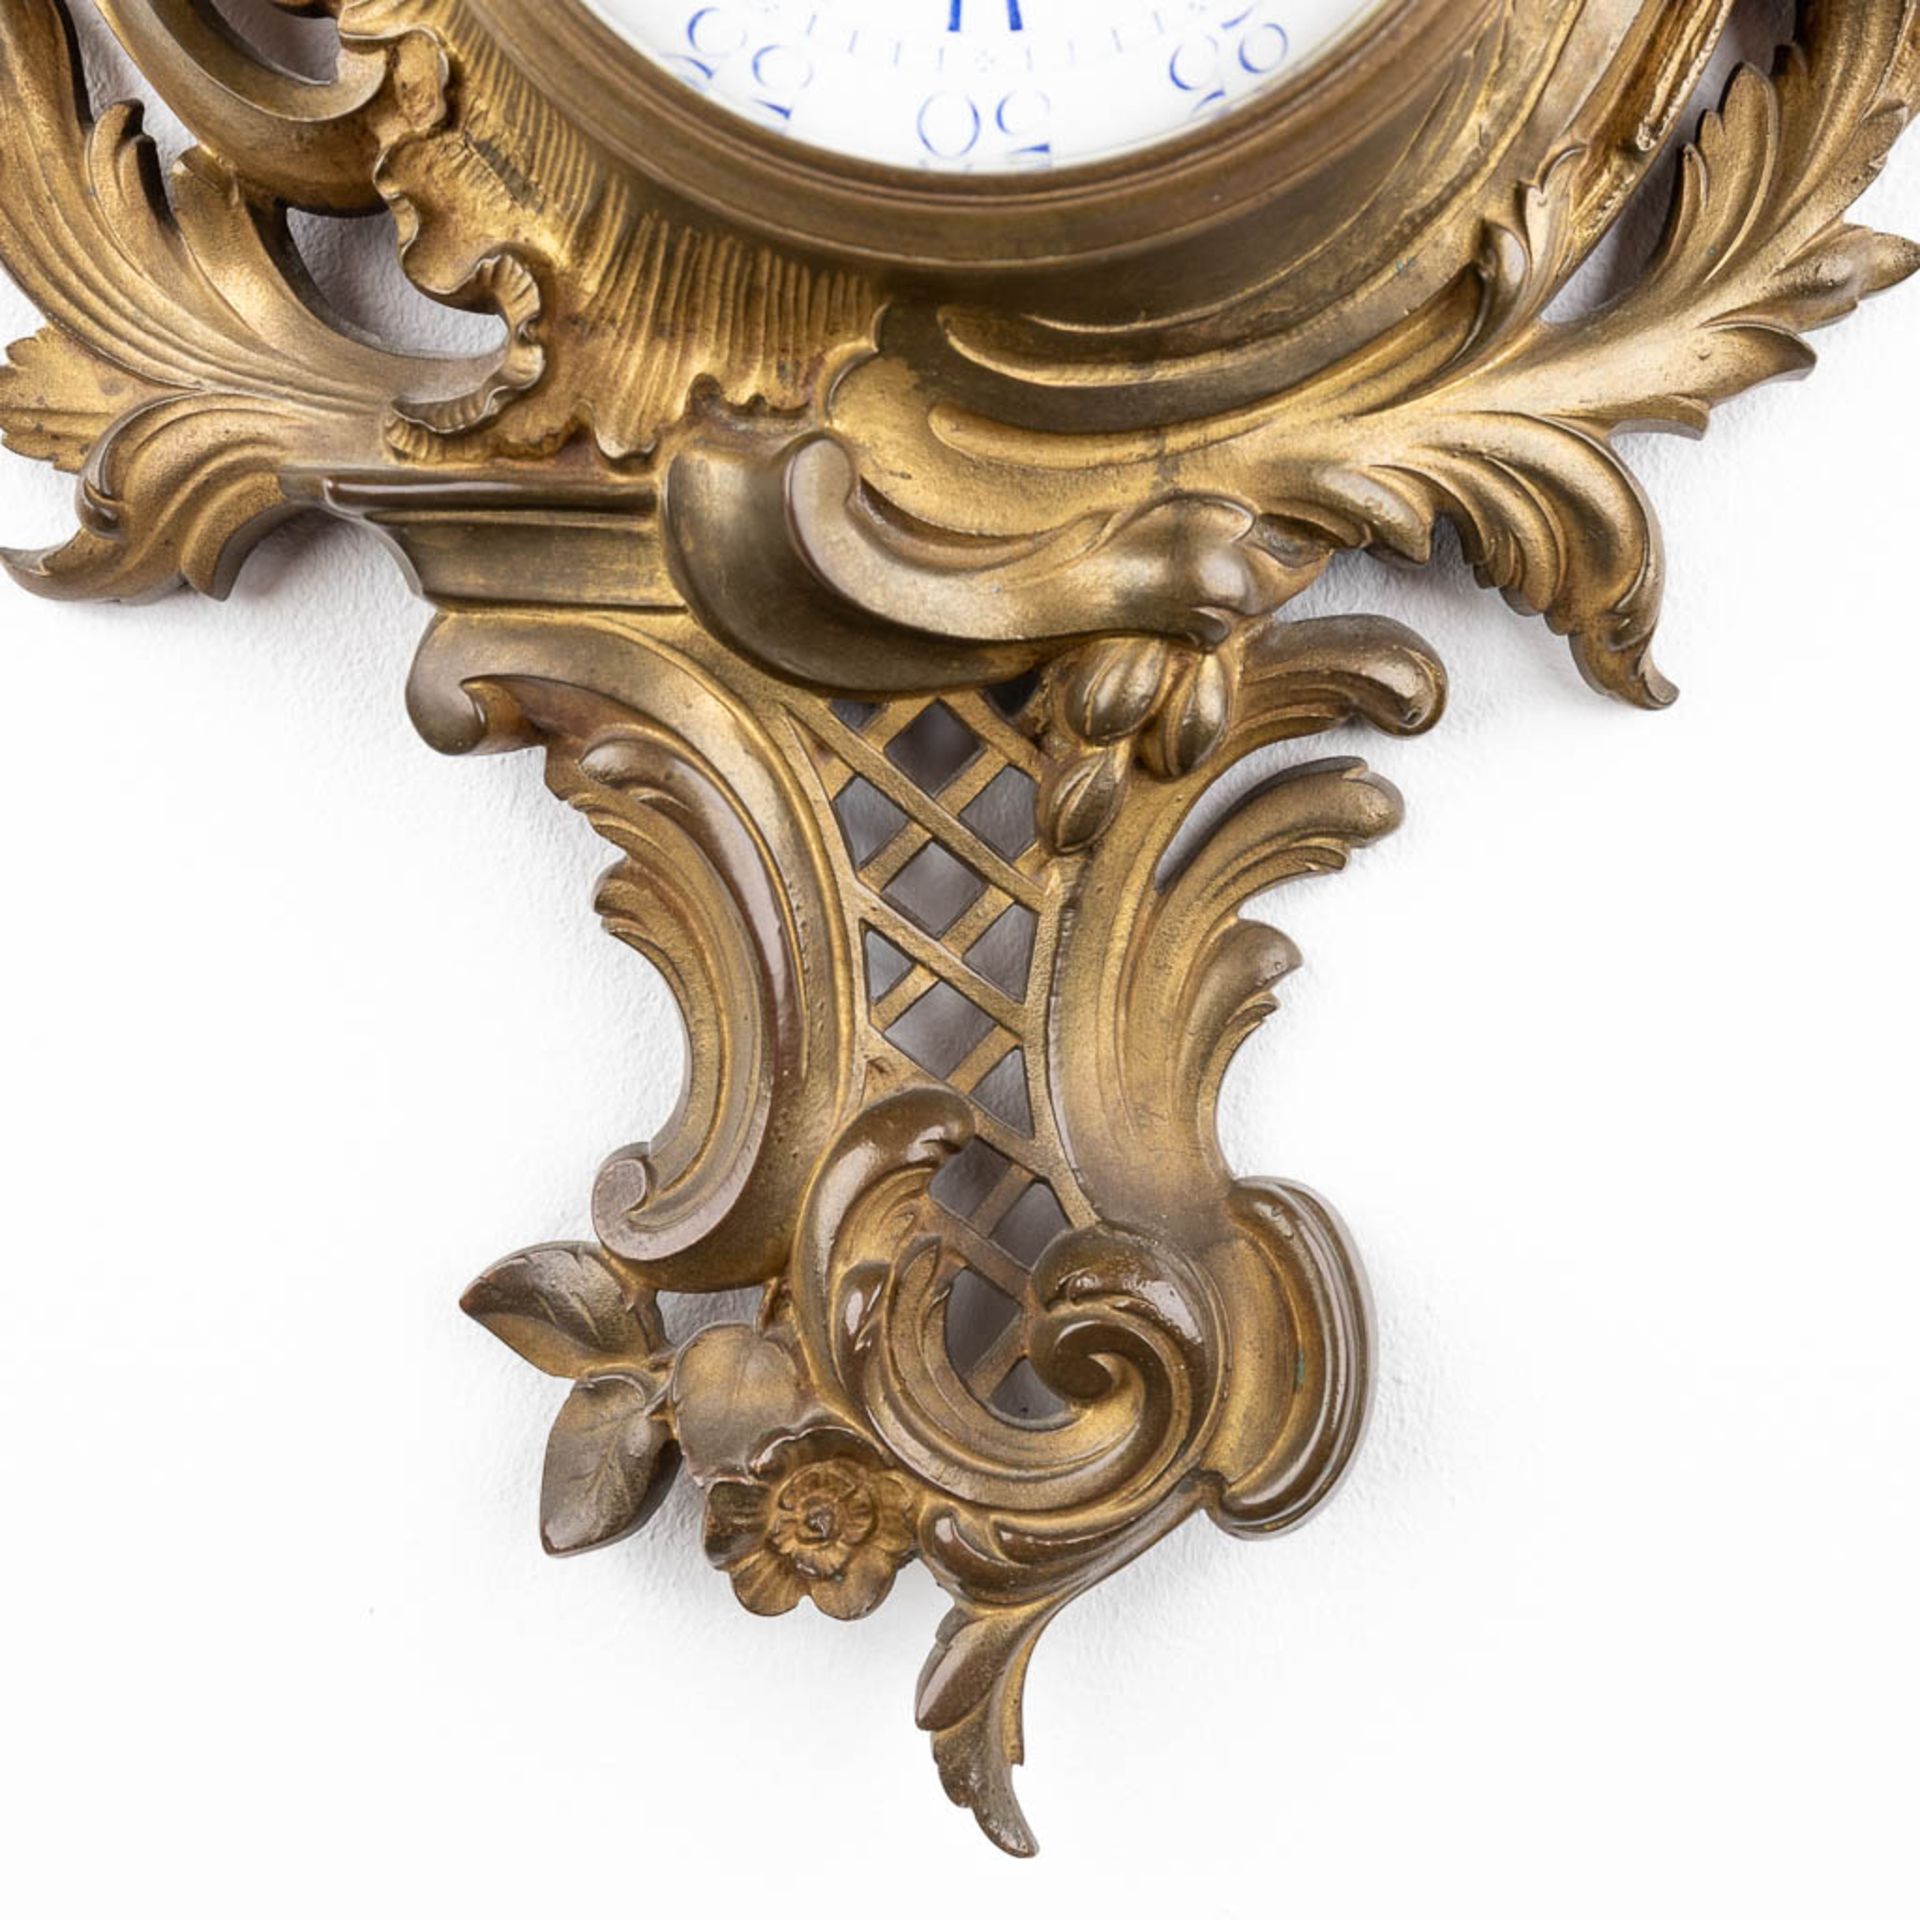 A cartel clock, bronze in Louis XV style. 20th C. (W: 30 x H: 52 cm) - Image 6 of 10